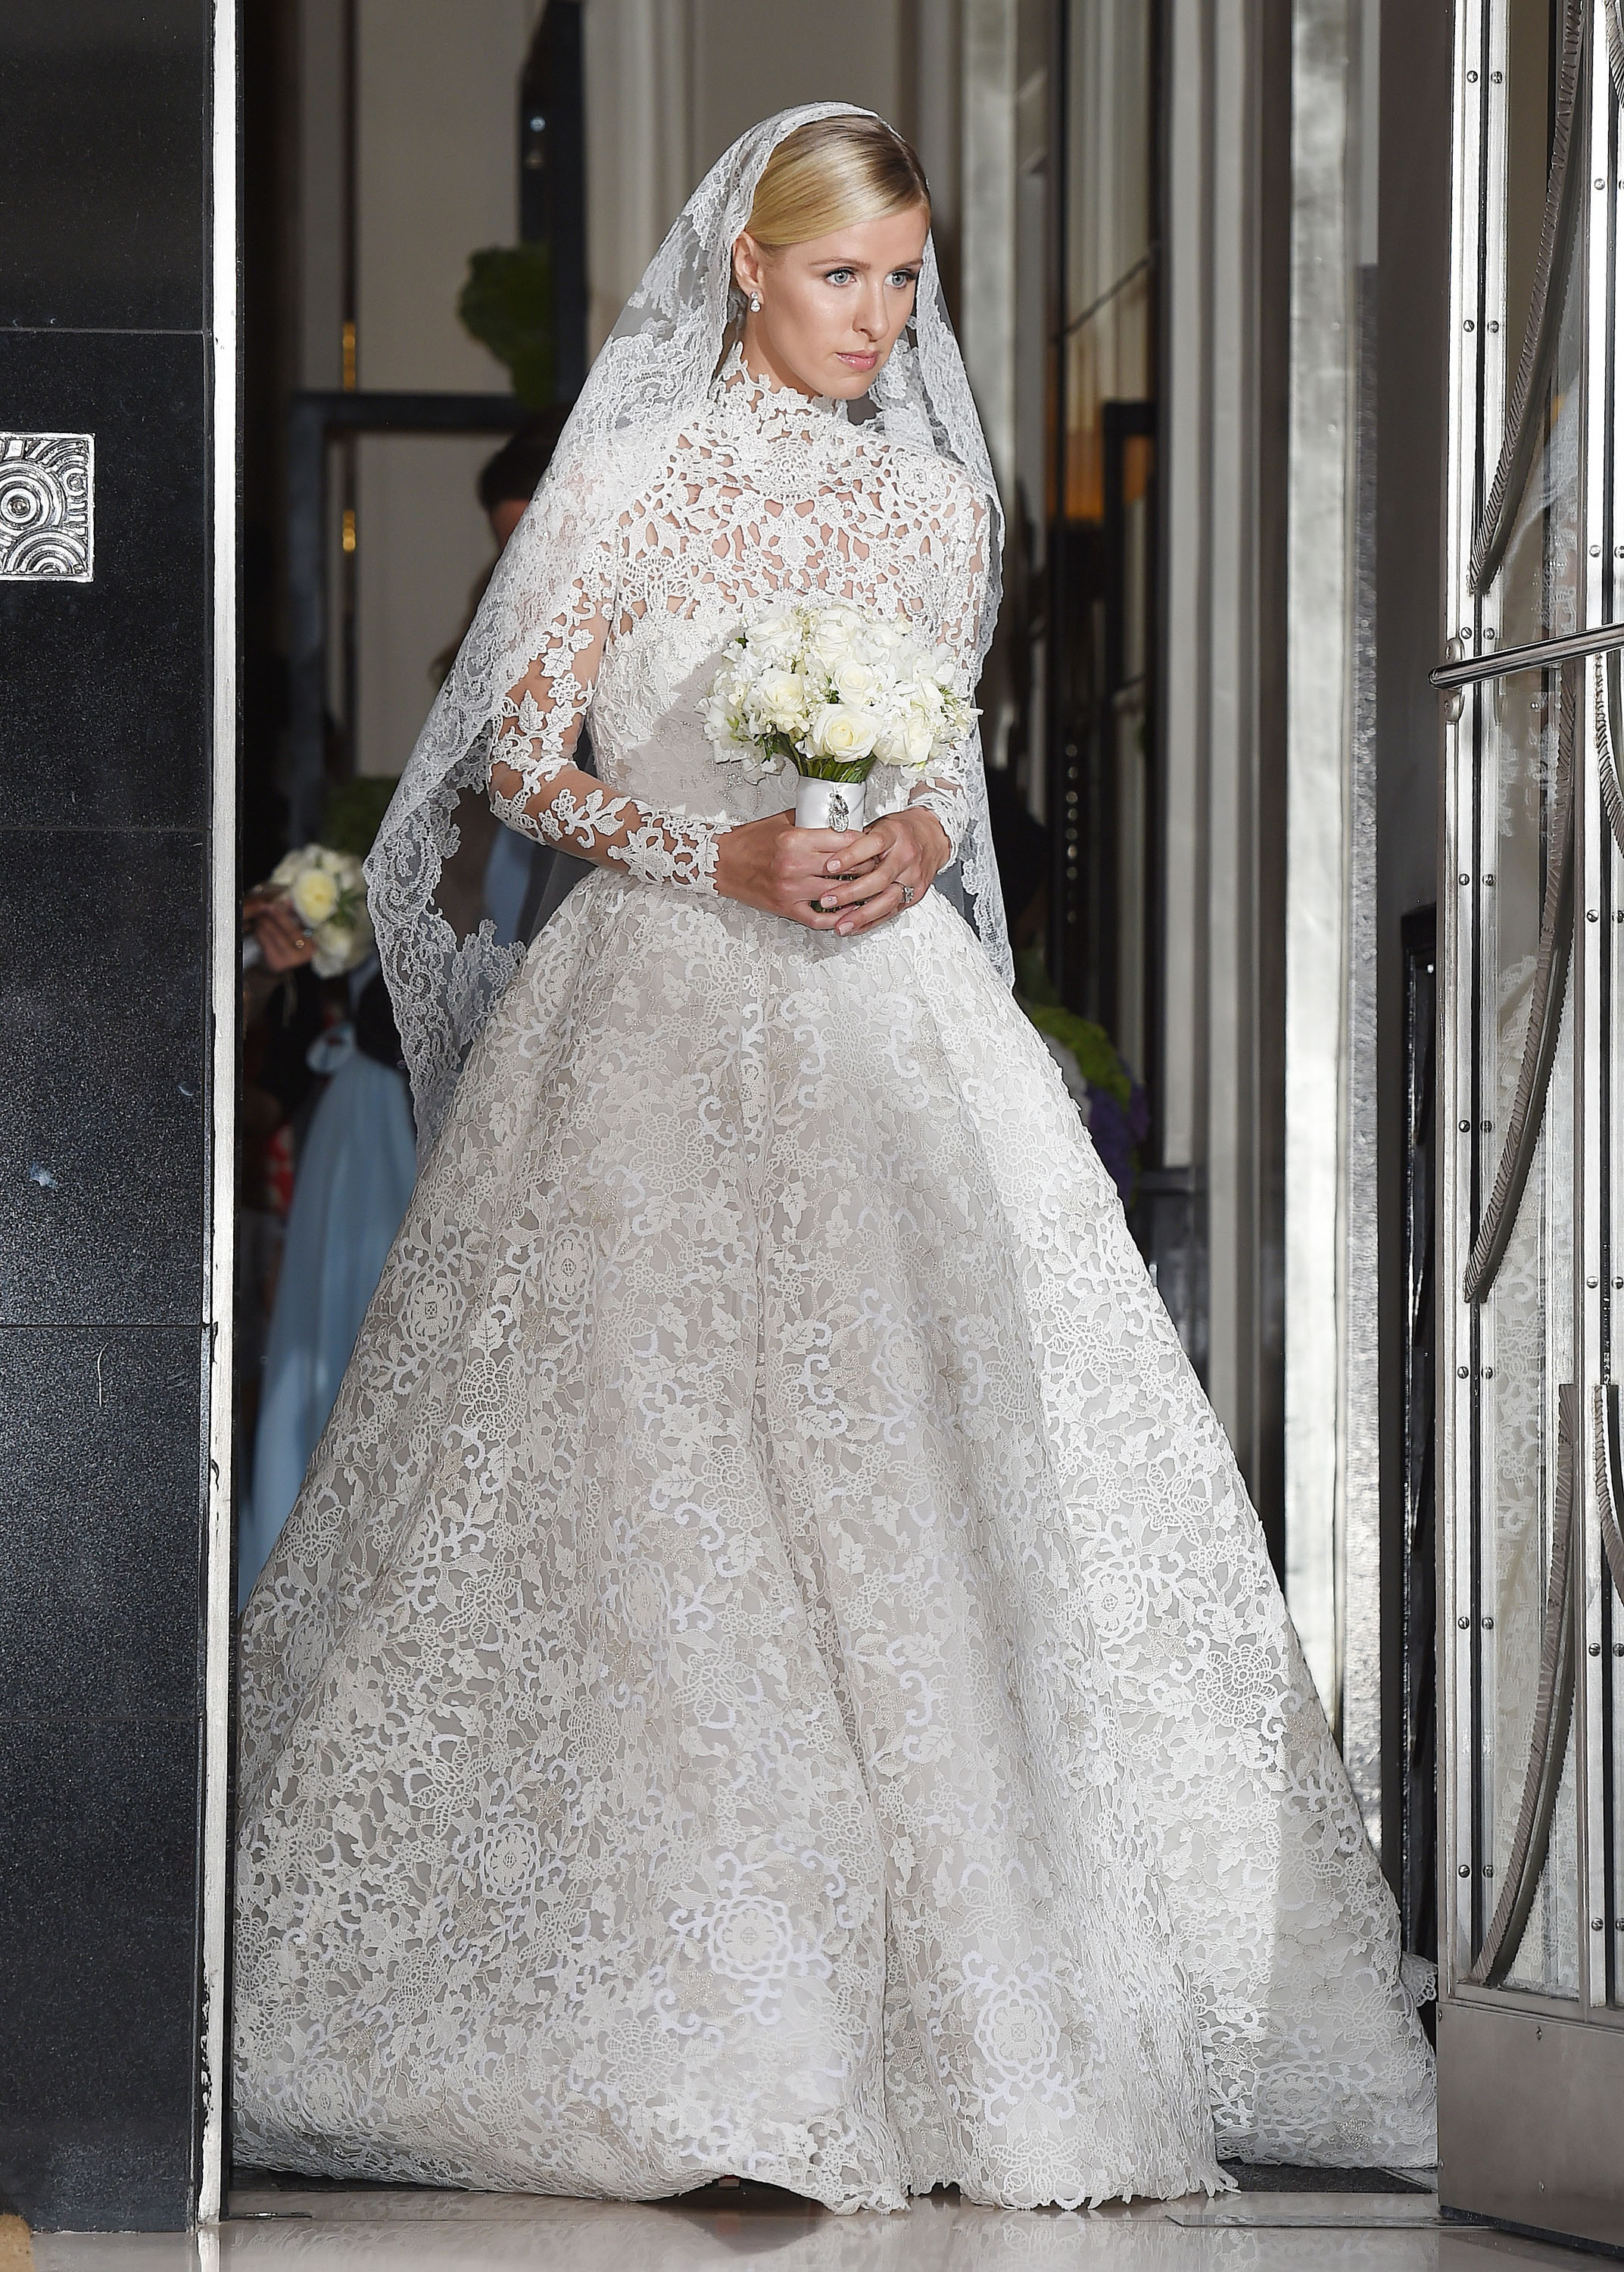 Weddings: Nicky Hilton Gets Married in Valentino